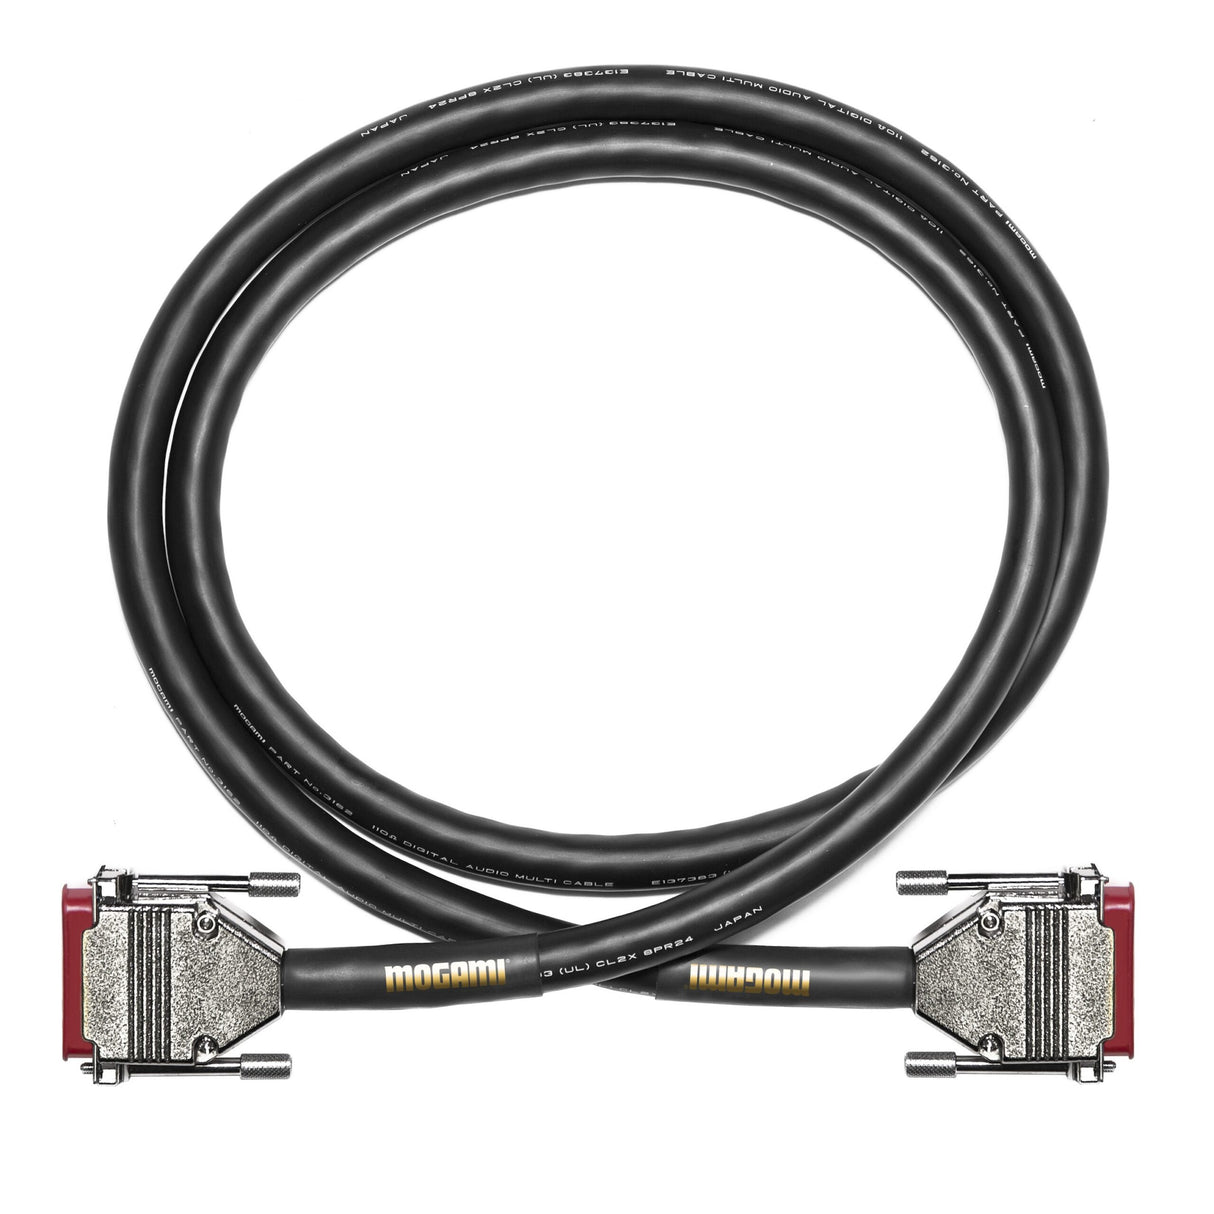 Mogami GOLD AES YTD DB25-DB25-05 DB25 to DB25 AES Yamaha to Tascam Format Crossover Cable, 5-Feet